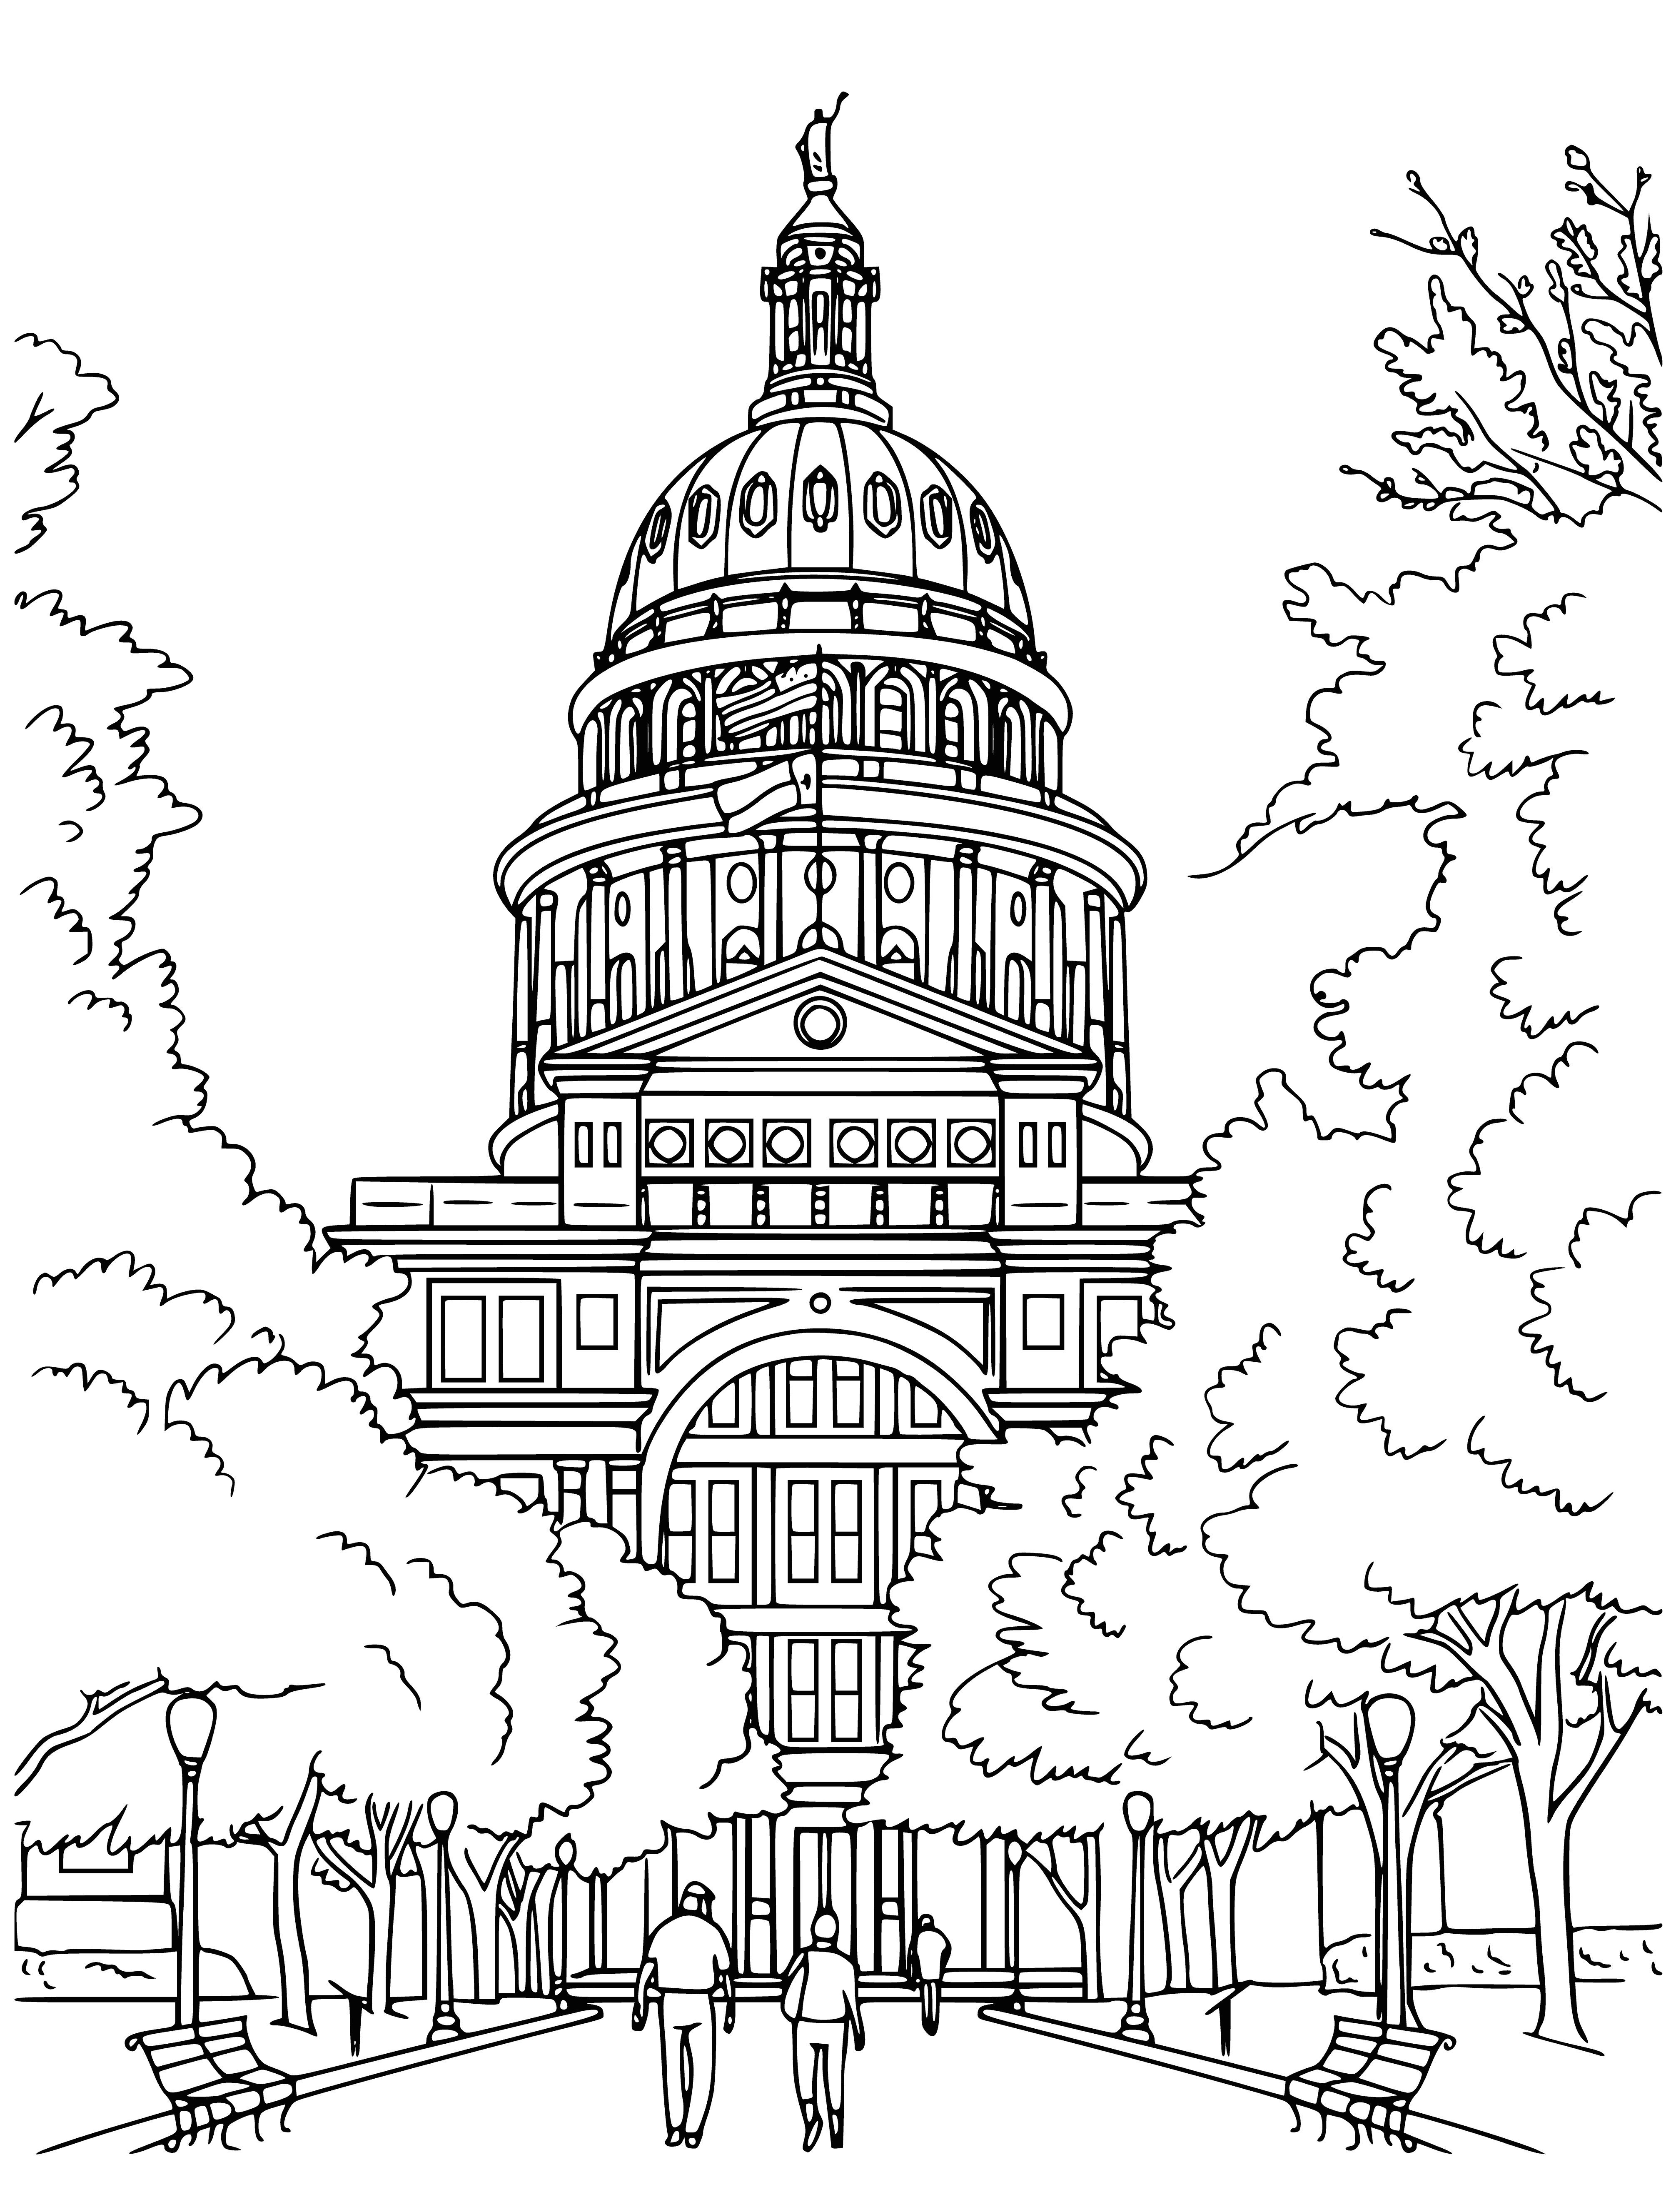 coloring page: Capitol Building, large white/rectangular w/front columns & large dome. Surrounded by green lawn & trees/shrubs.